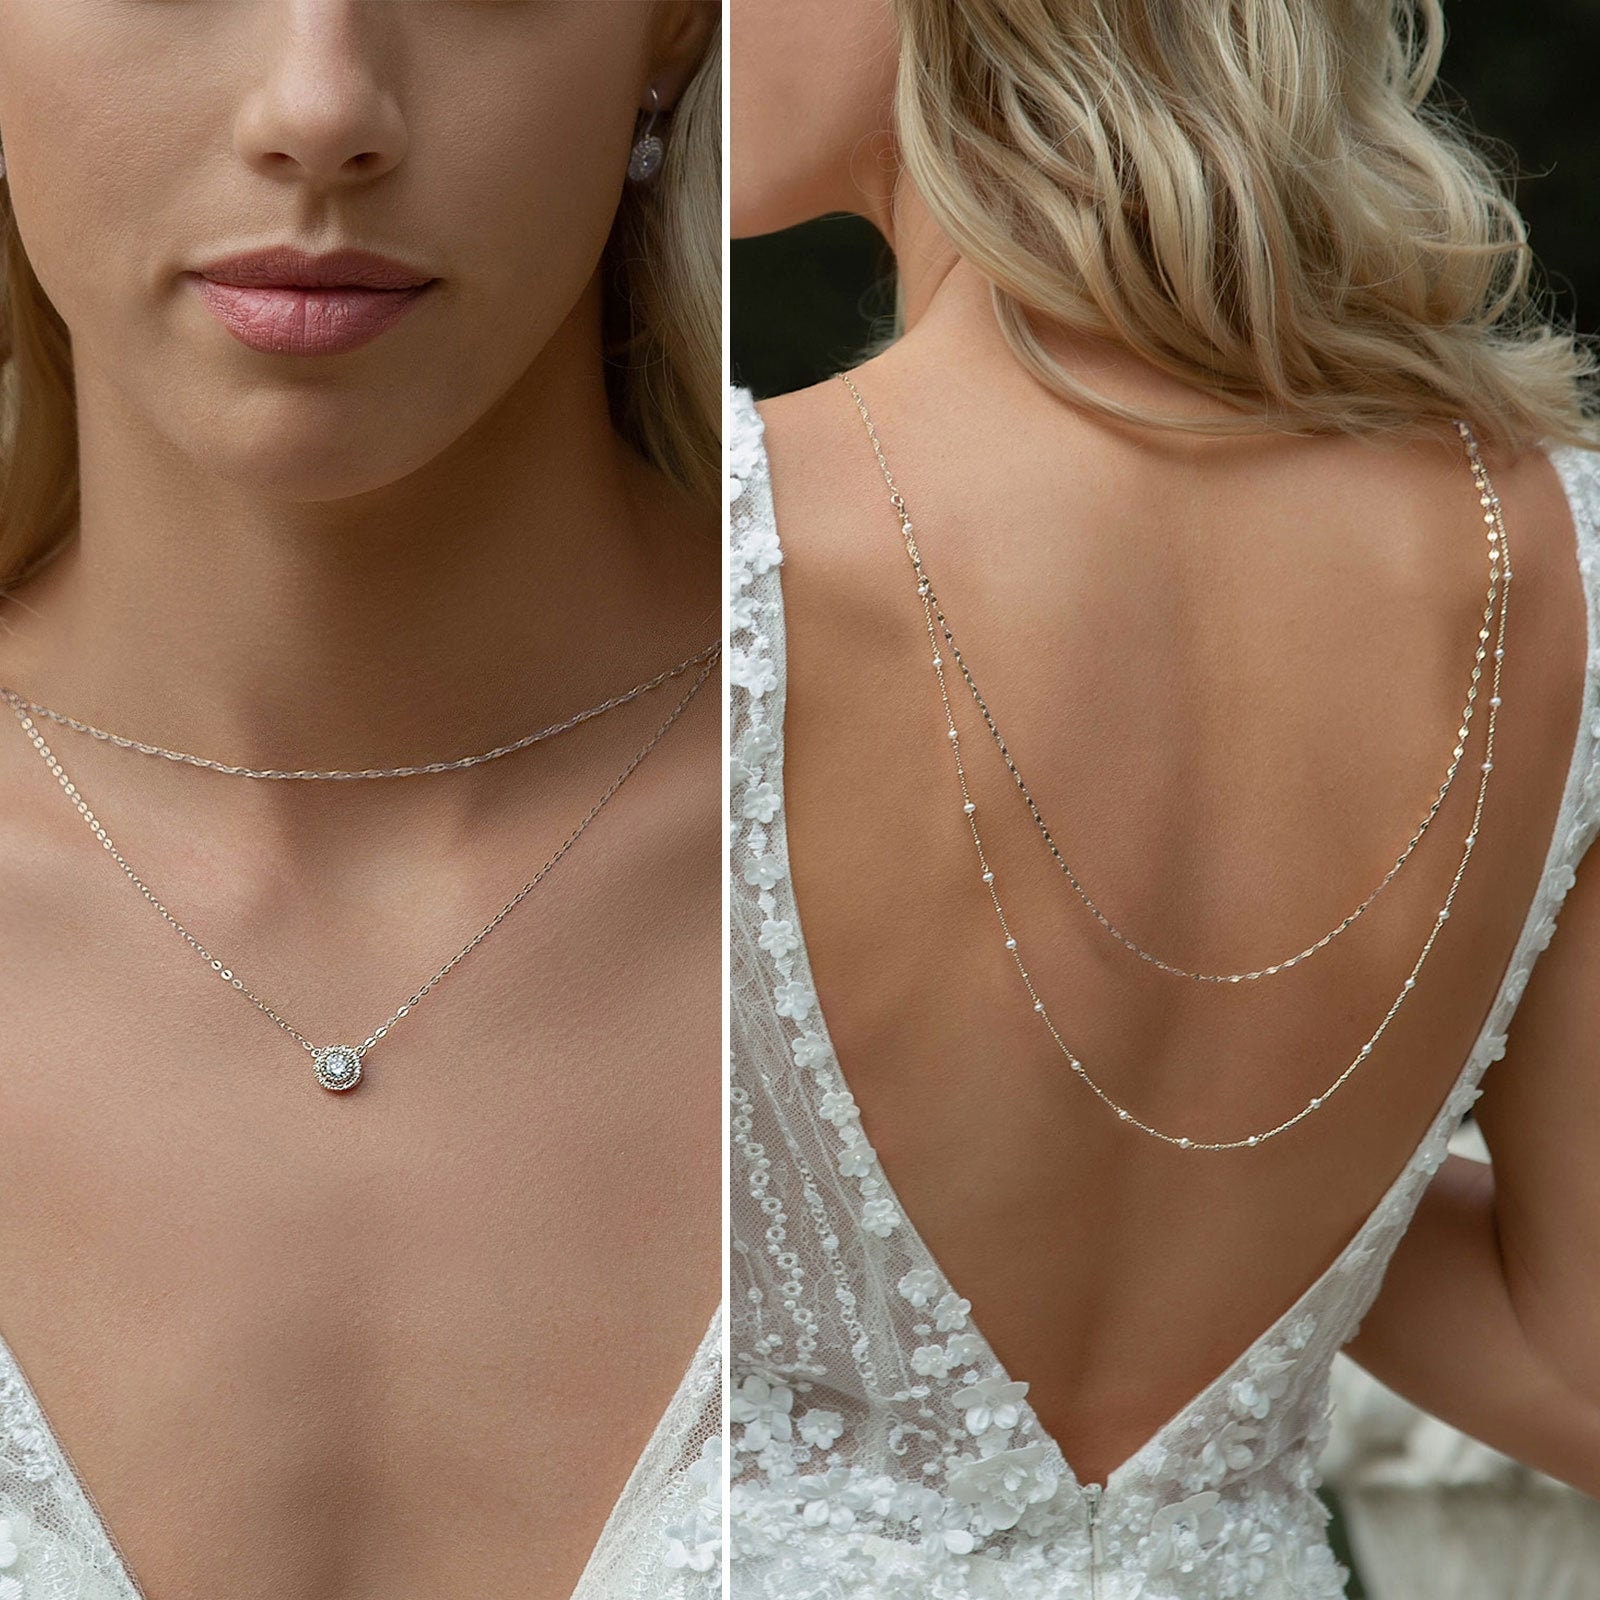 Pearl Backdrop Necklace for Low Back,Backless,Off Shoulder Wedding Dress |  Backdrops necklace, Bridal jewelry, Matching jewelry